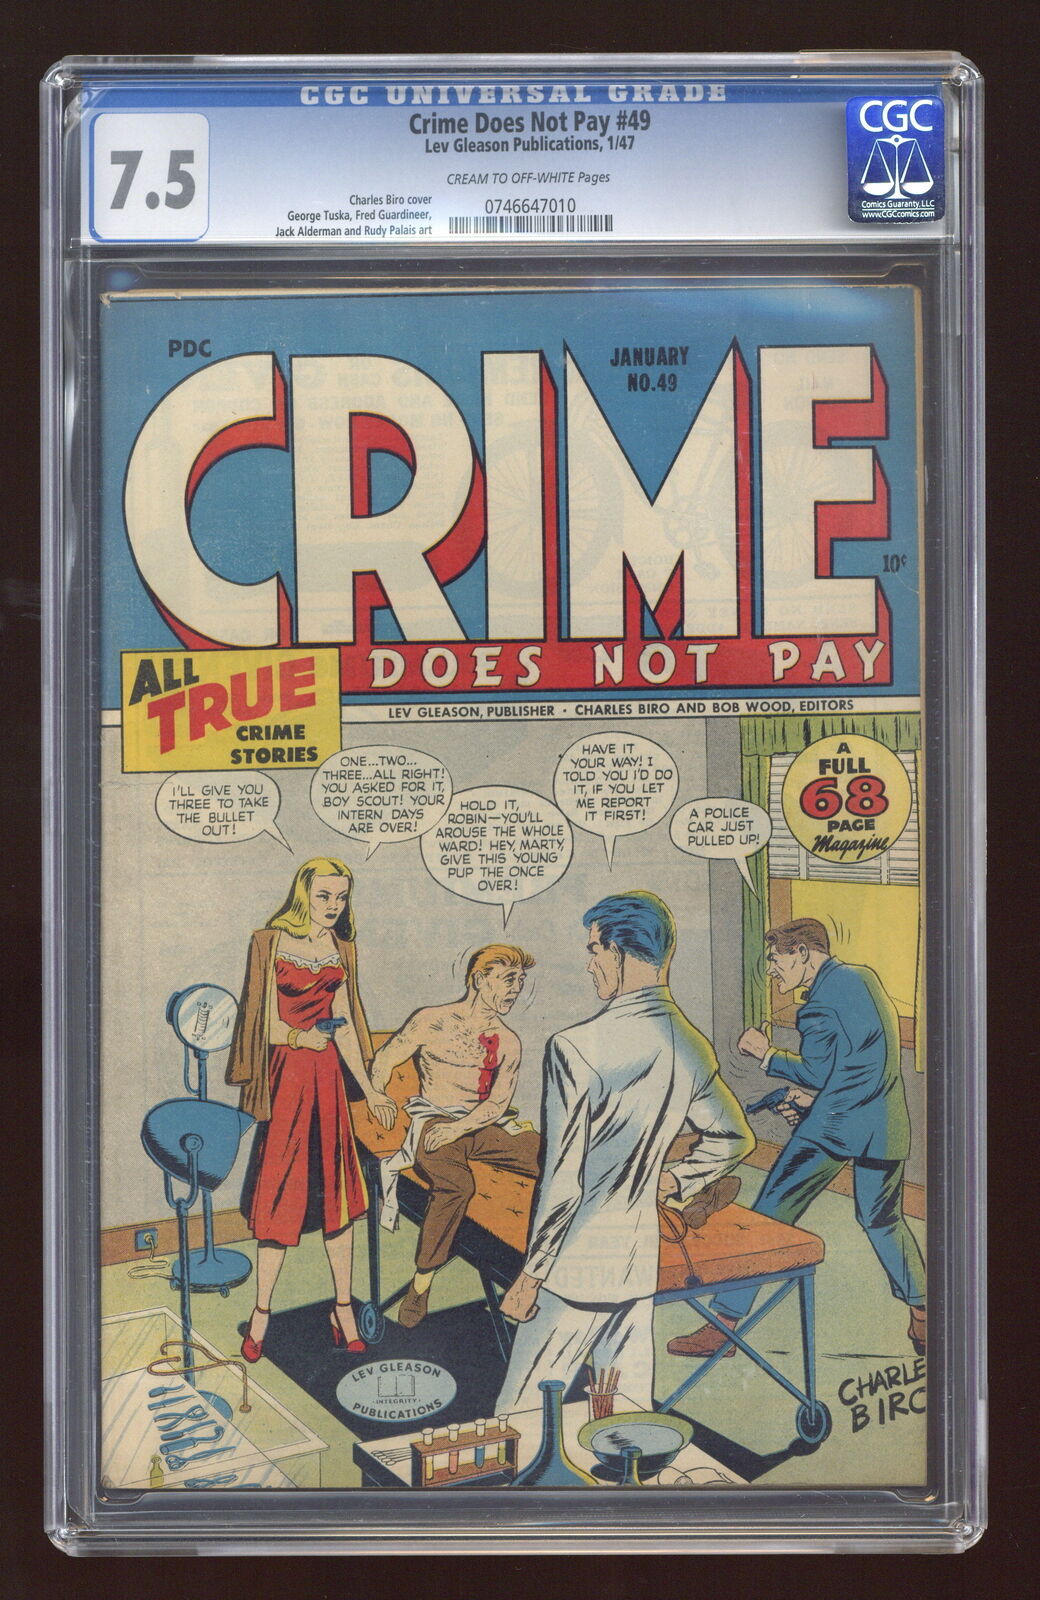 Crime Does Not Pay #49 CGC 7.5 1946 0746647010